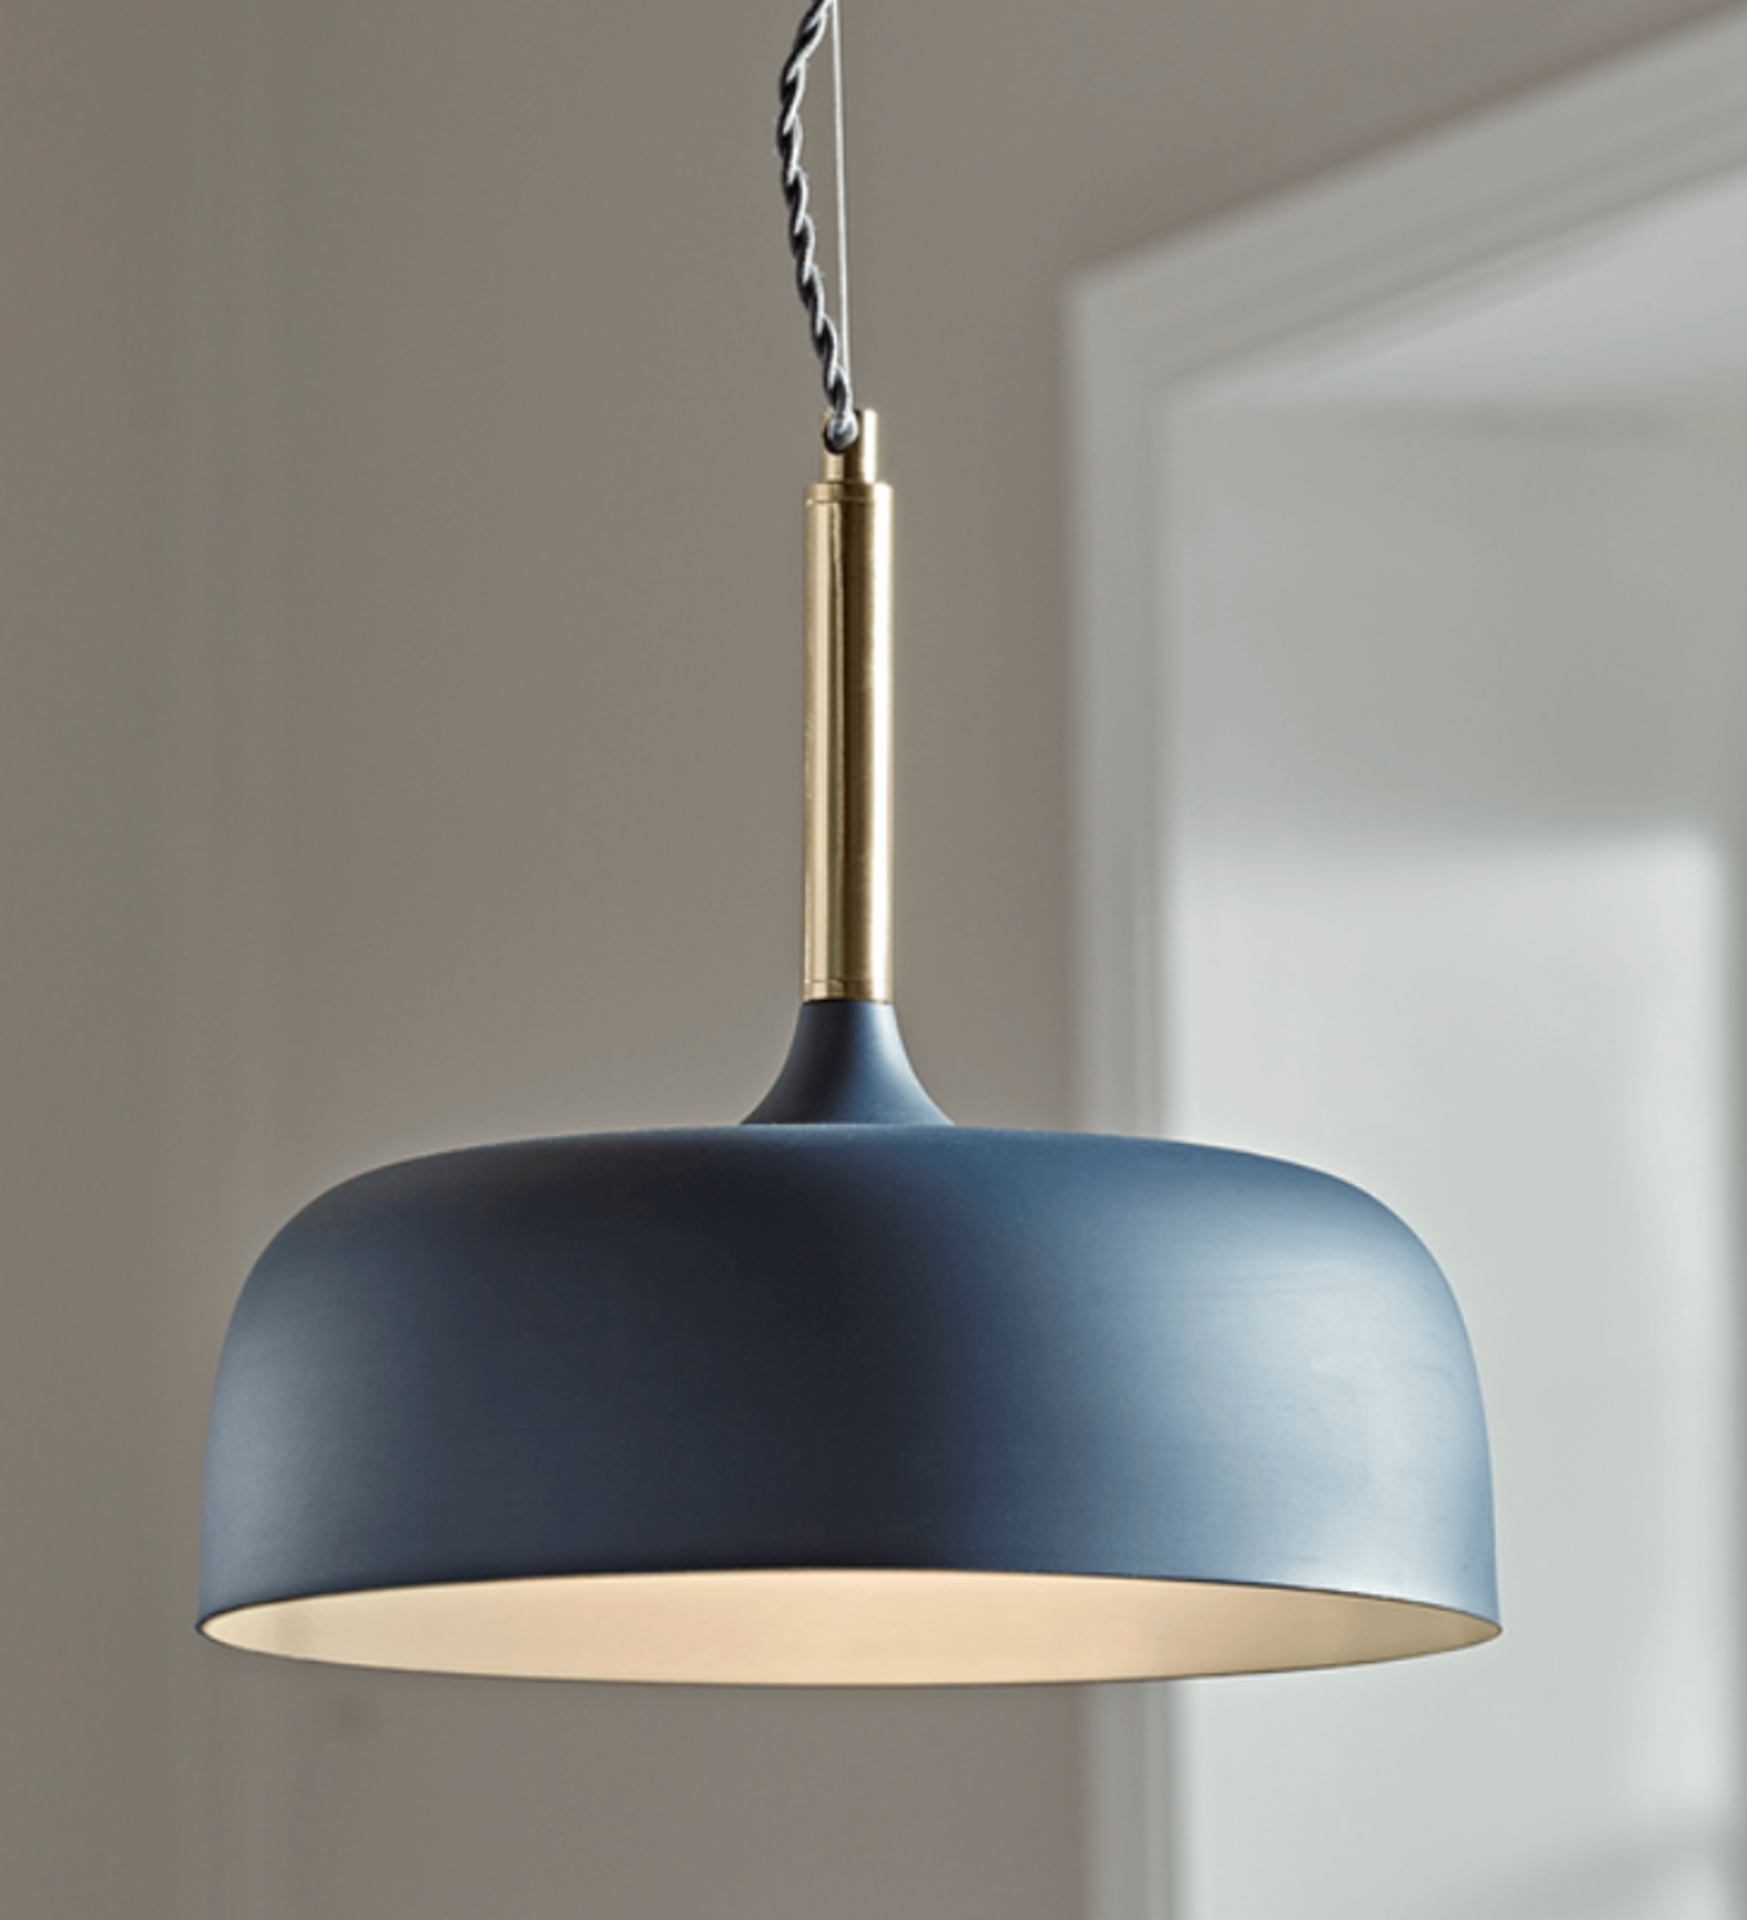 Blue & Brass Pendant Light. RRP £225.00. With an elegant, wide shade in deep, matte blue, our simple